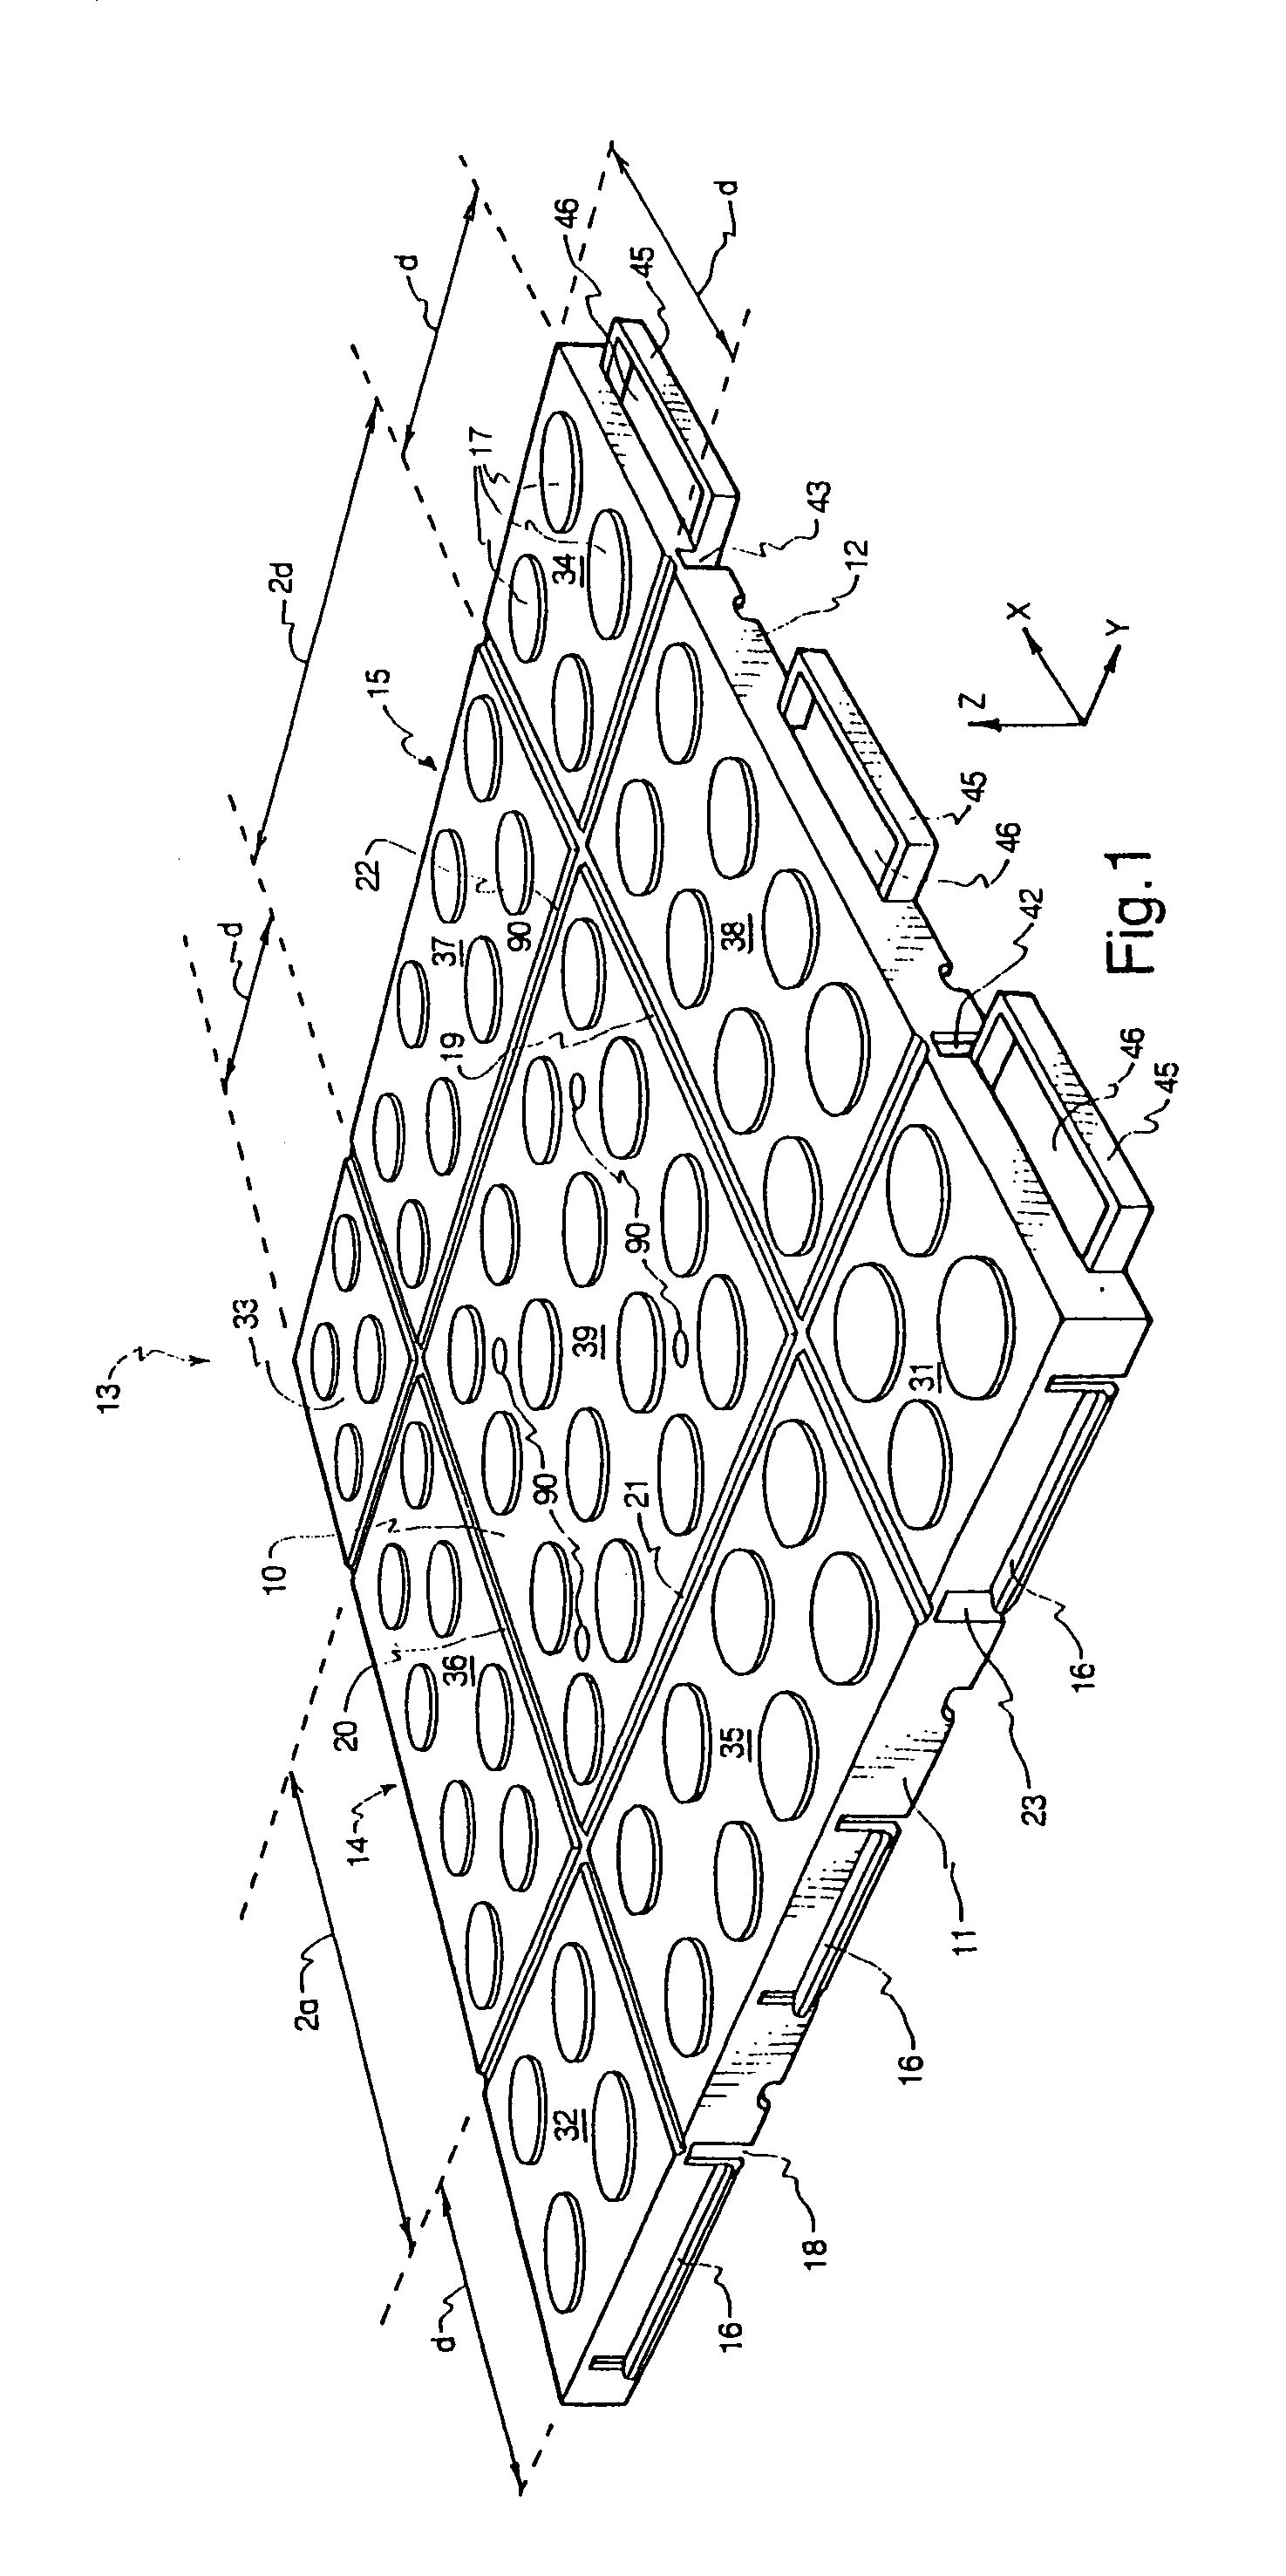 Roll-up floor tile system and method